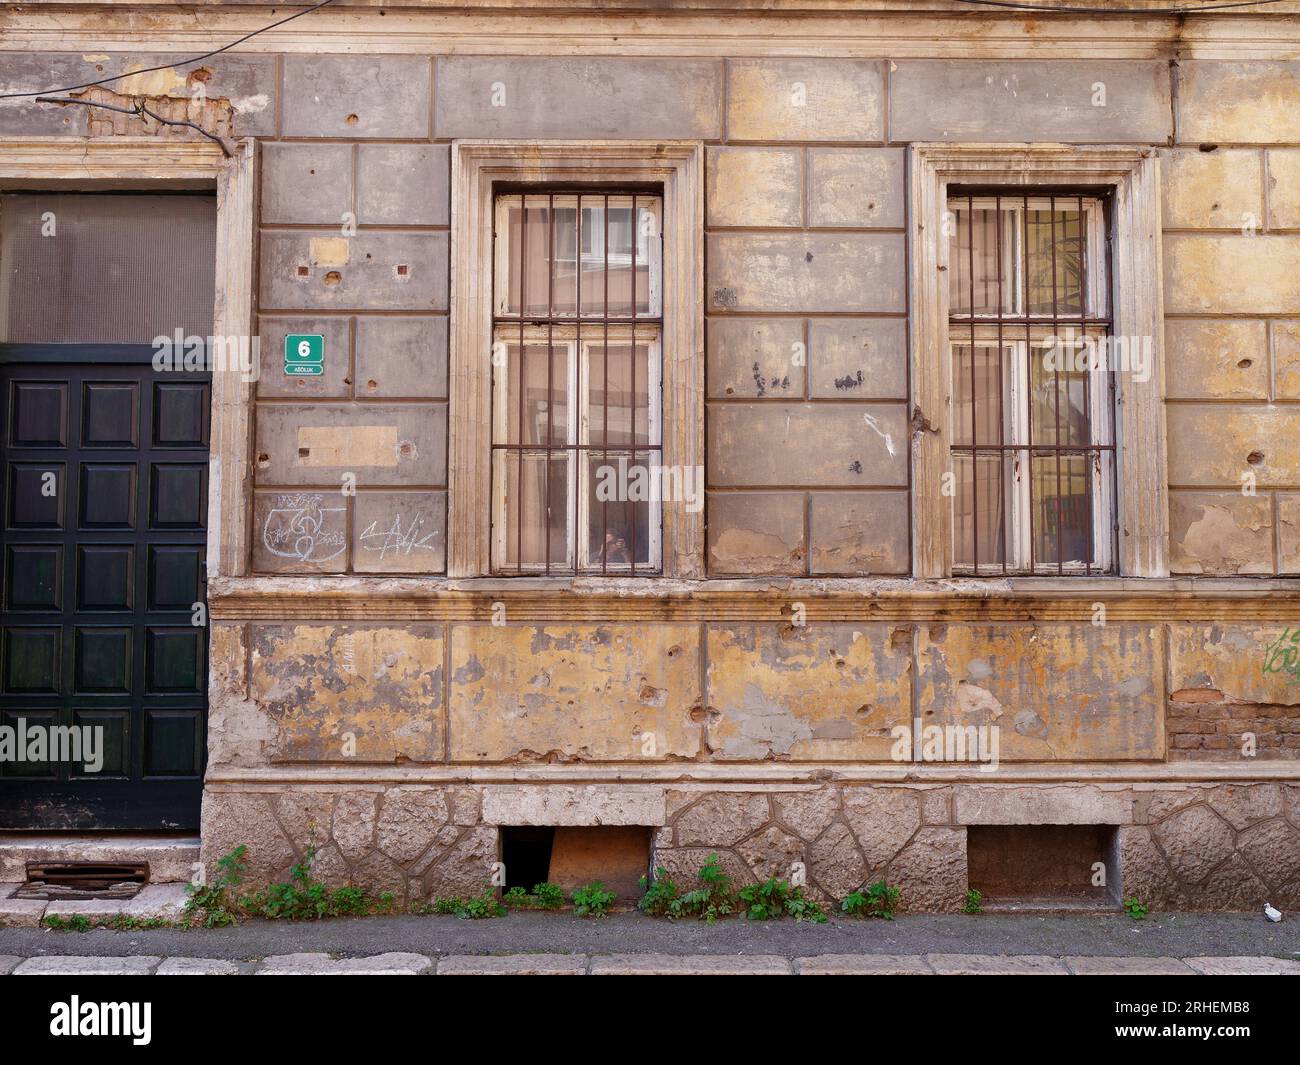 Shell, shrapnel and bullet holes in the side of a building with metal window grills, city of Sarajevo, Bosnia and Herzegovina, August 16,2023. Stock Photo